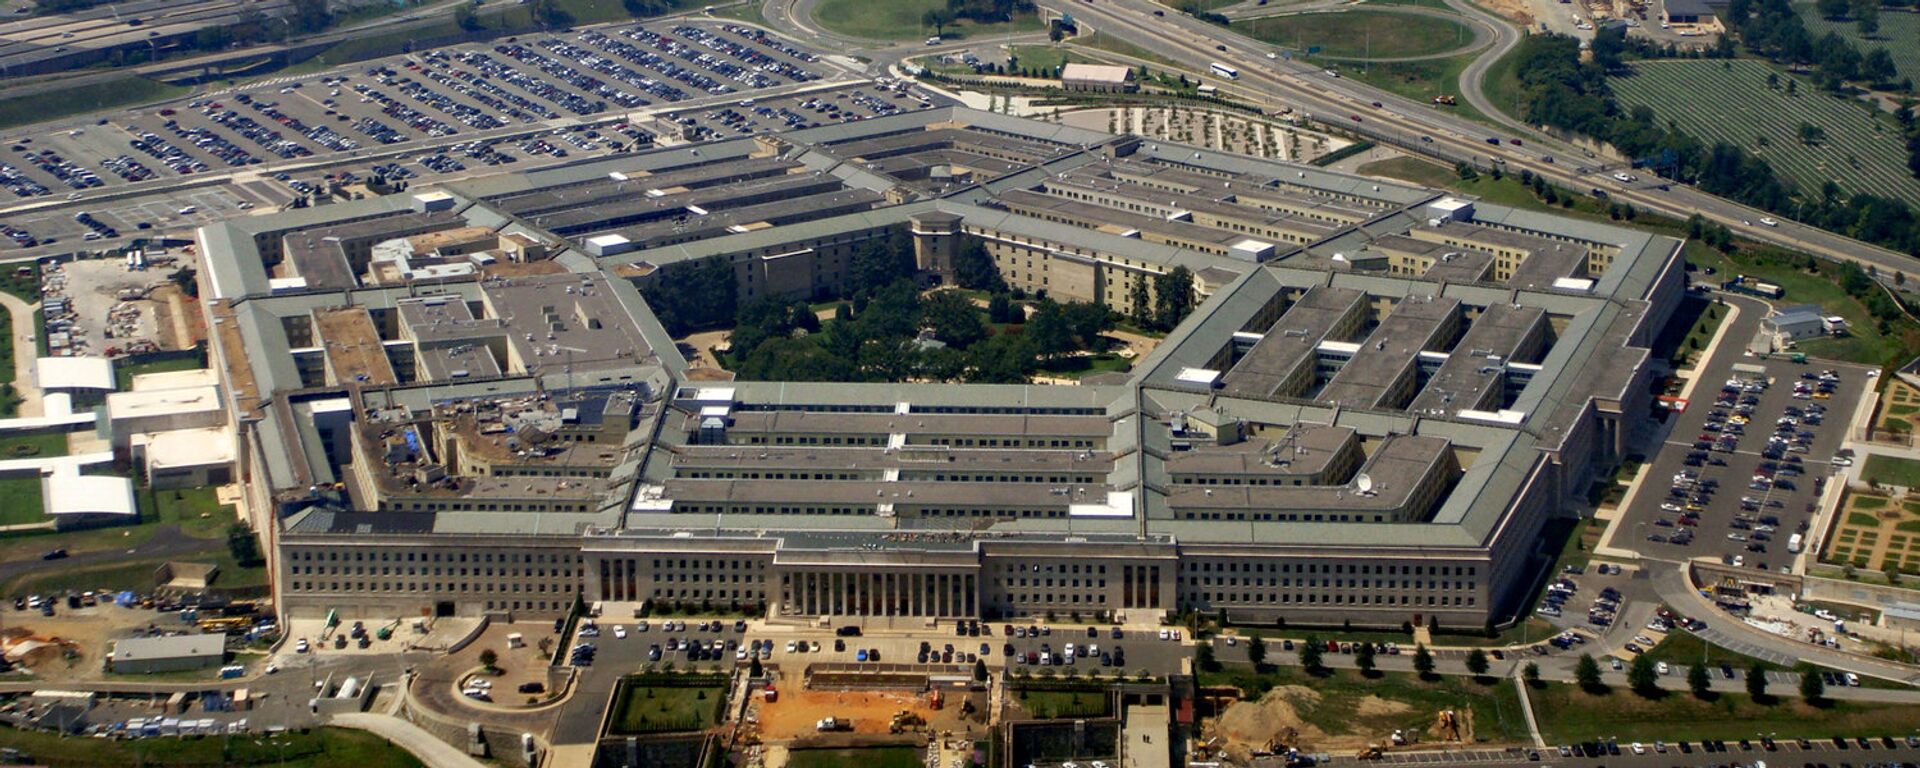 Aerial view of the Pentagon - 俄羅斯衛星通訊社, 1920, 06.06.2021